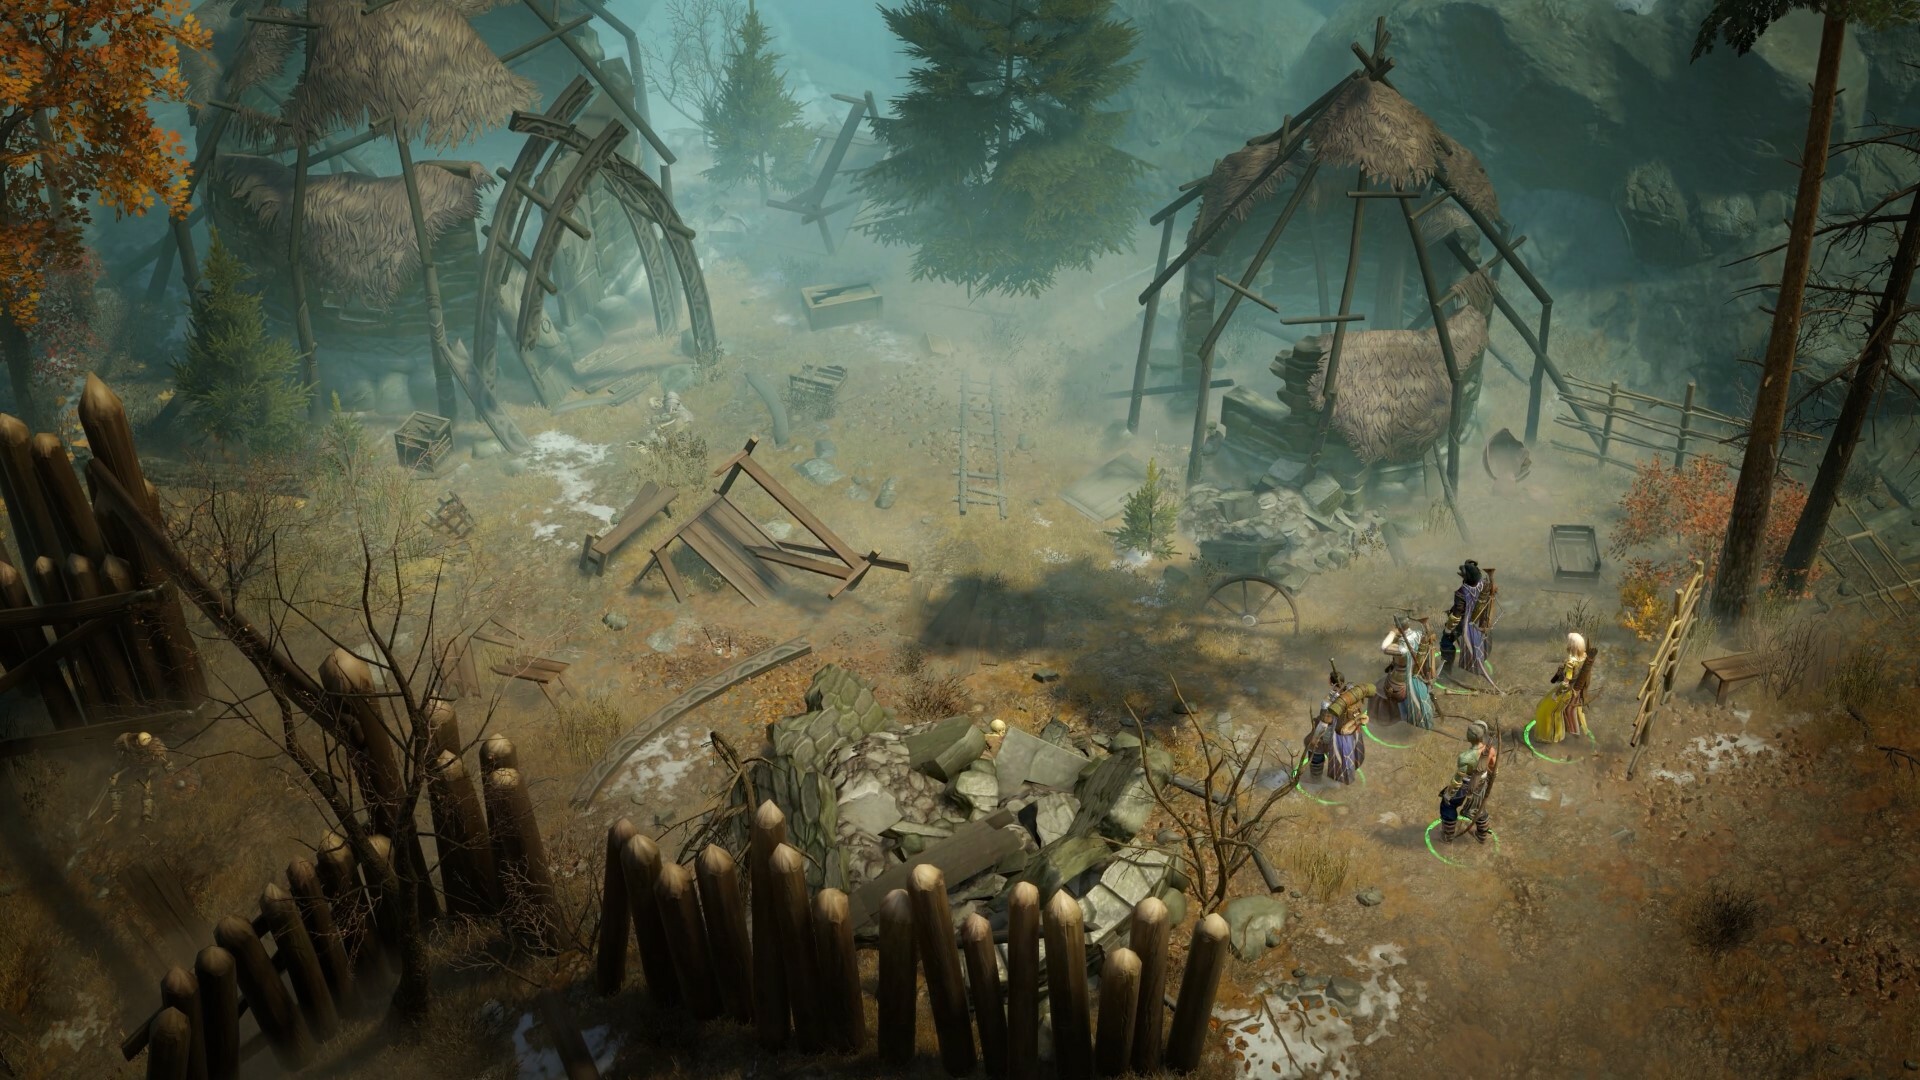 Pathfinder: Wrath of the Righteous - The Last Sarkorians Free Download for PC